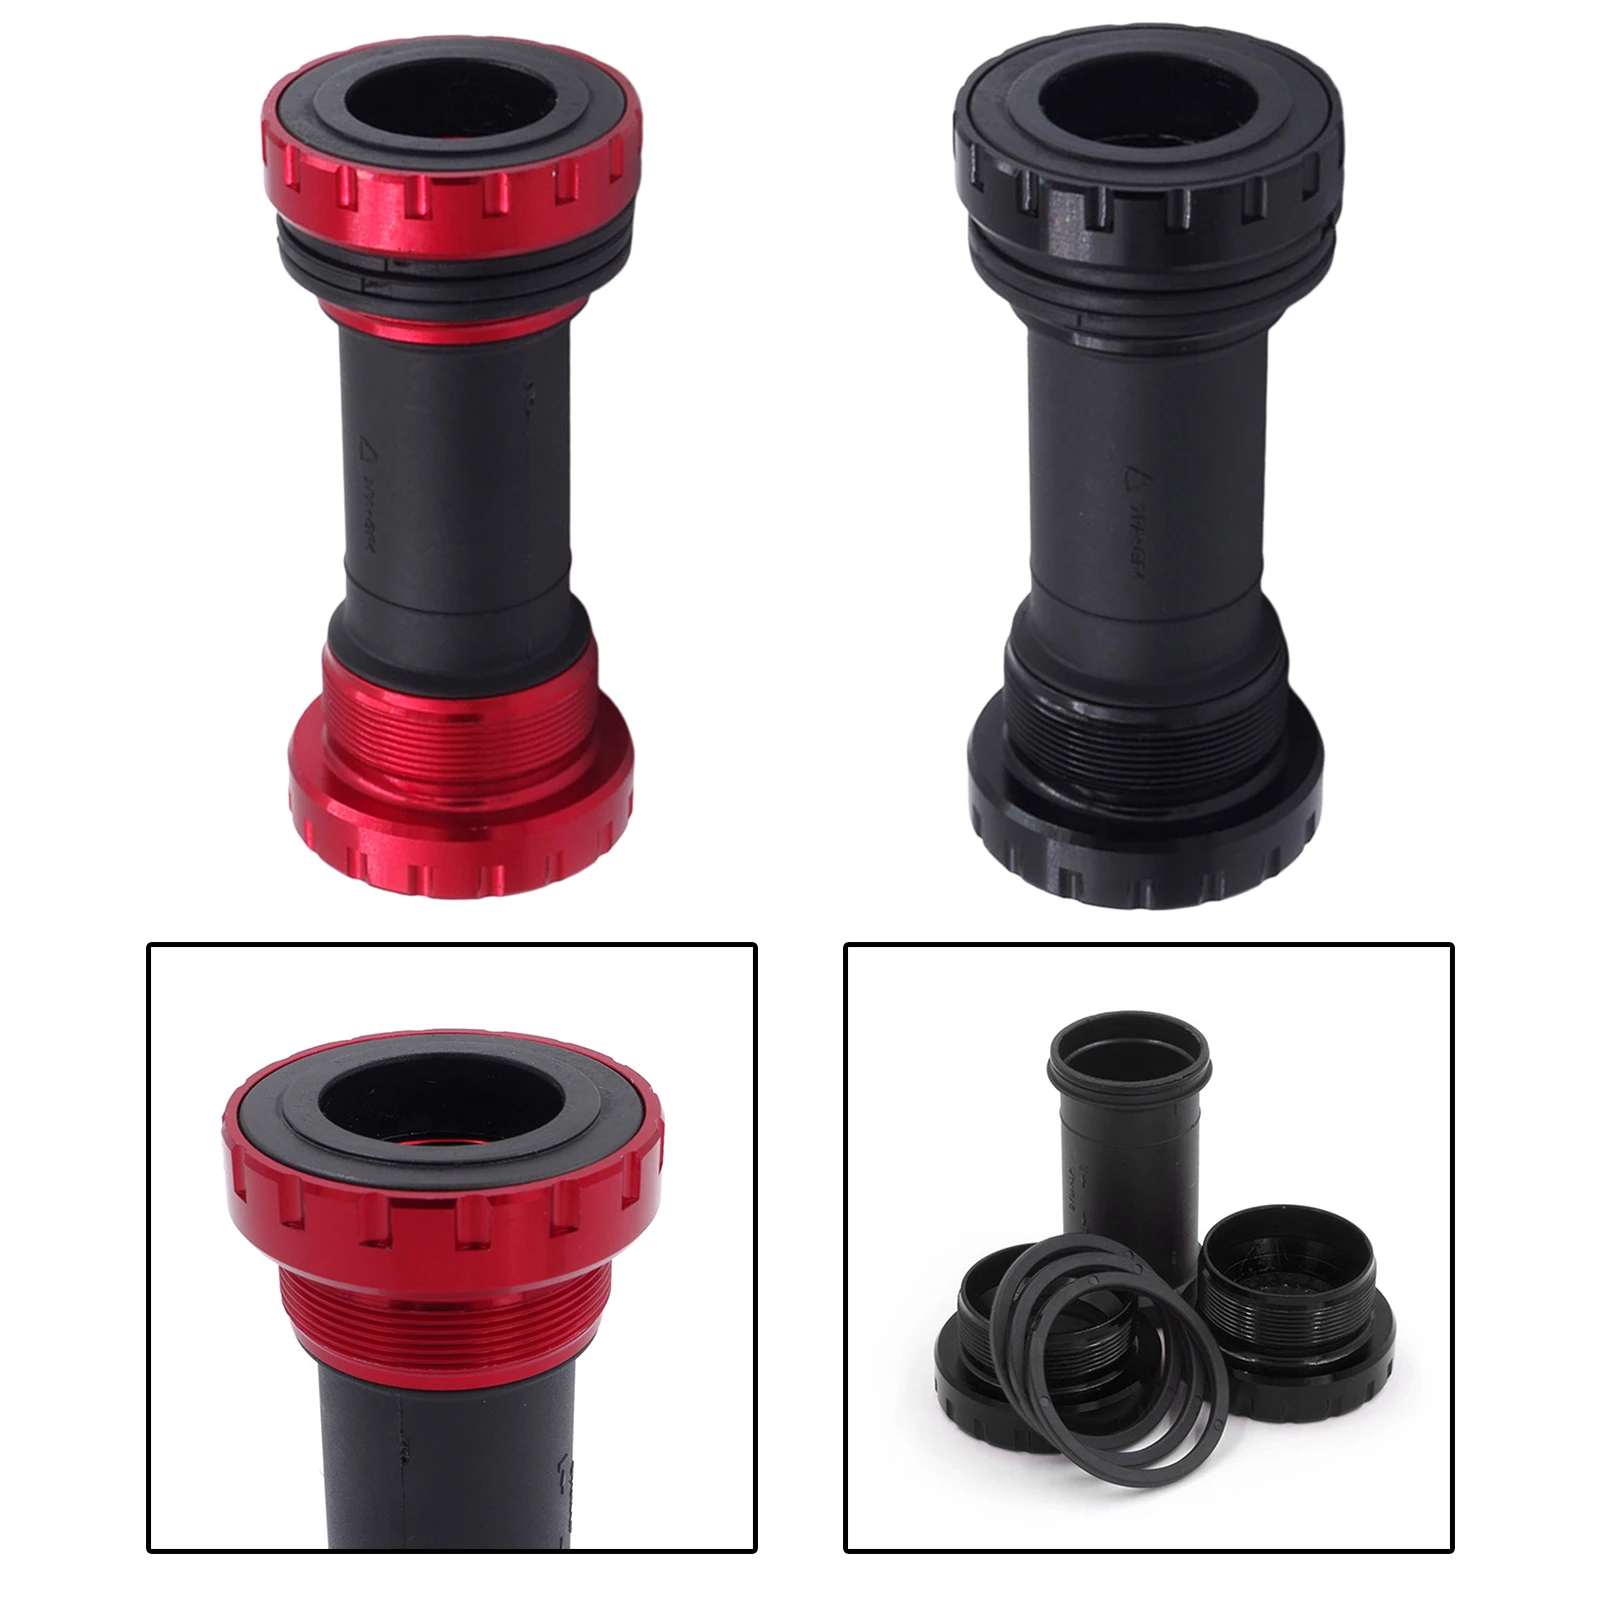 24mm Adapter Bearing Press Fit Bicycle Bottom Brackets Axle for MTB Road bike parts 24 Crankset chainset